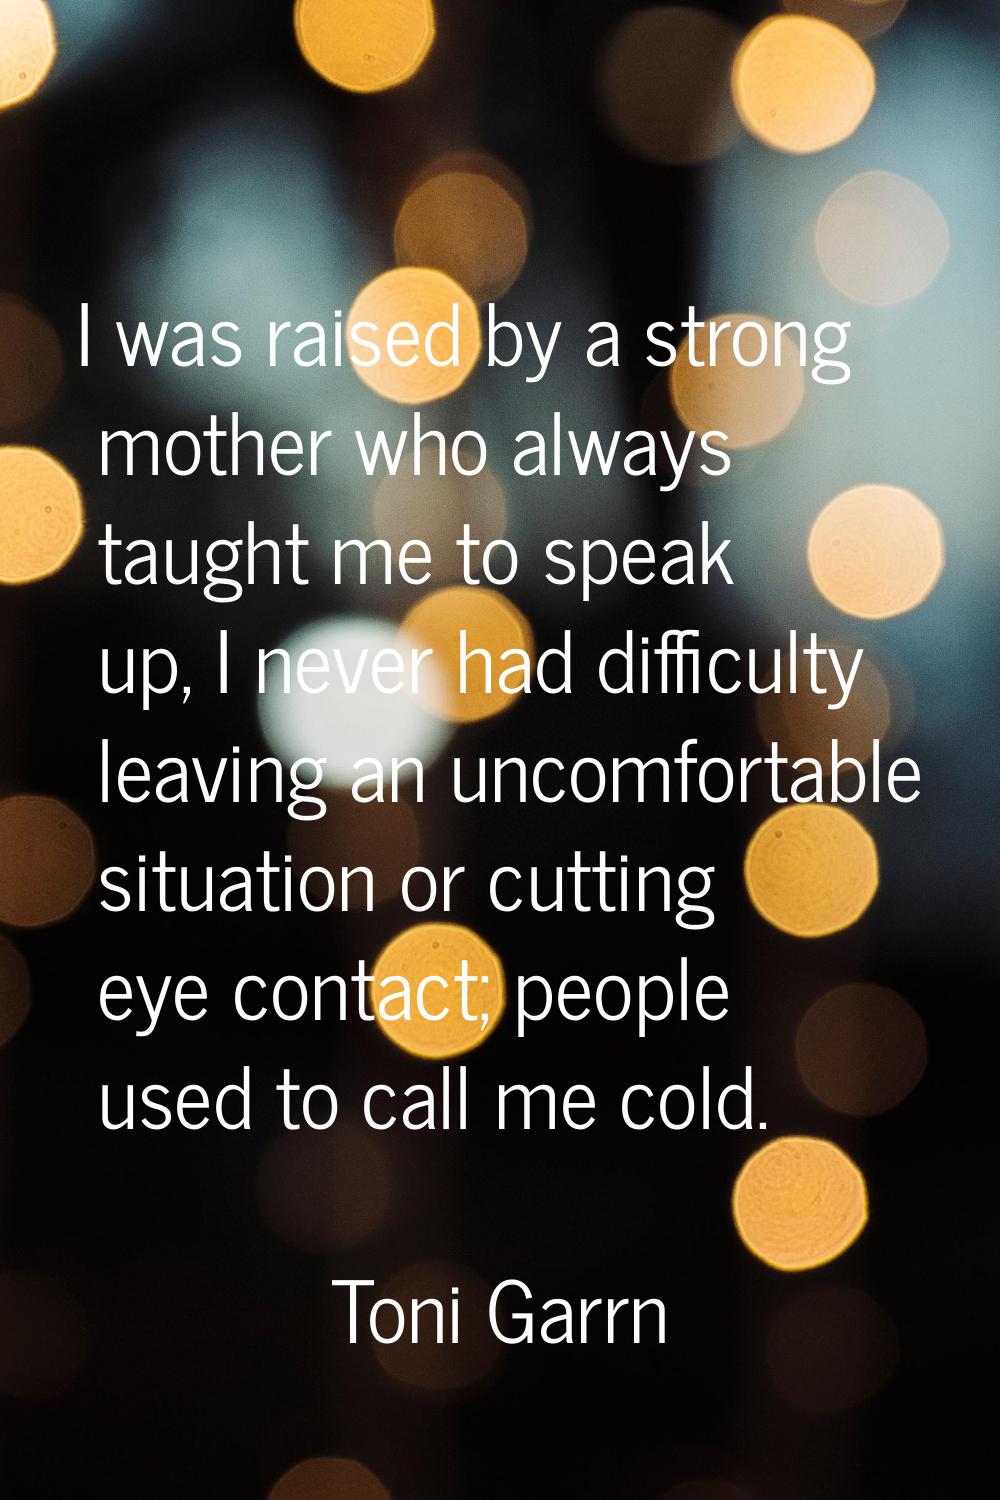 I was raised by a strong mother who always taught me to speak up, I never had difficulty leaving an